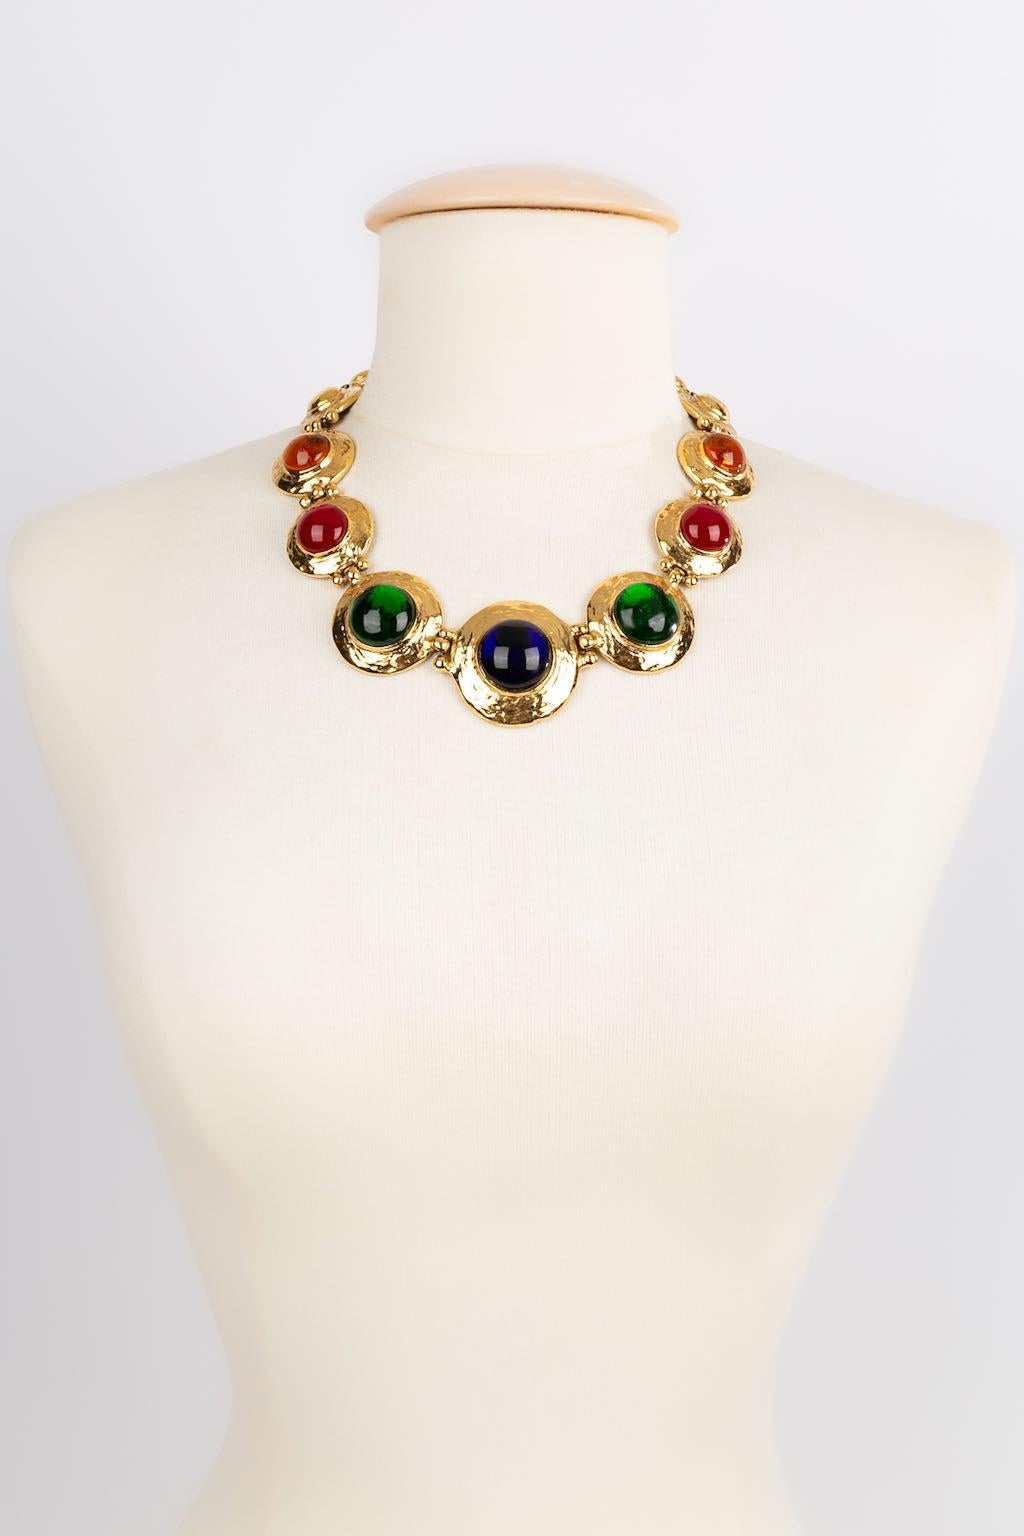 Yves Saint Laurent -(Made in France) Articulated necklace in gold metal paved with colored cabochons.

Additional information: 
Dimensions: Length: 52 cm - Diameter of the central medallion: 4 cm
Condition: Very good condition
Seller Ref number: